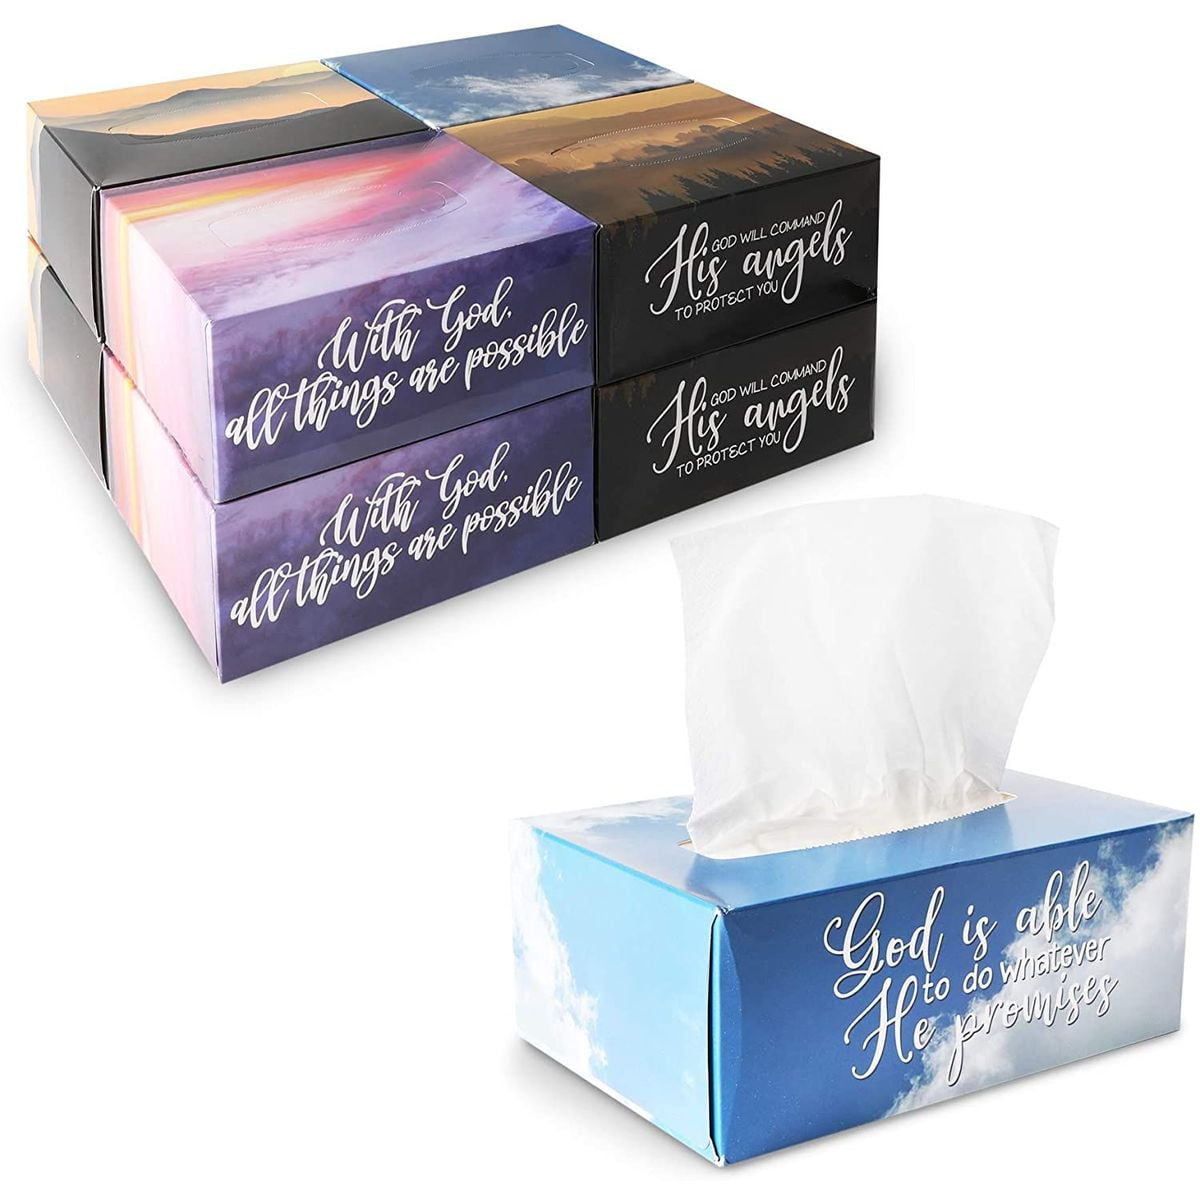 Pack of 3 Kleenex Tissues 2-ply 690 Facial Tissues Total 230 Count 